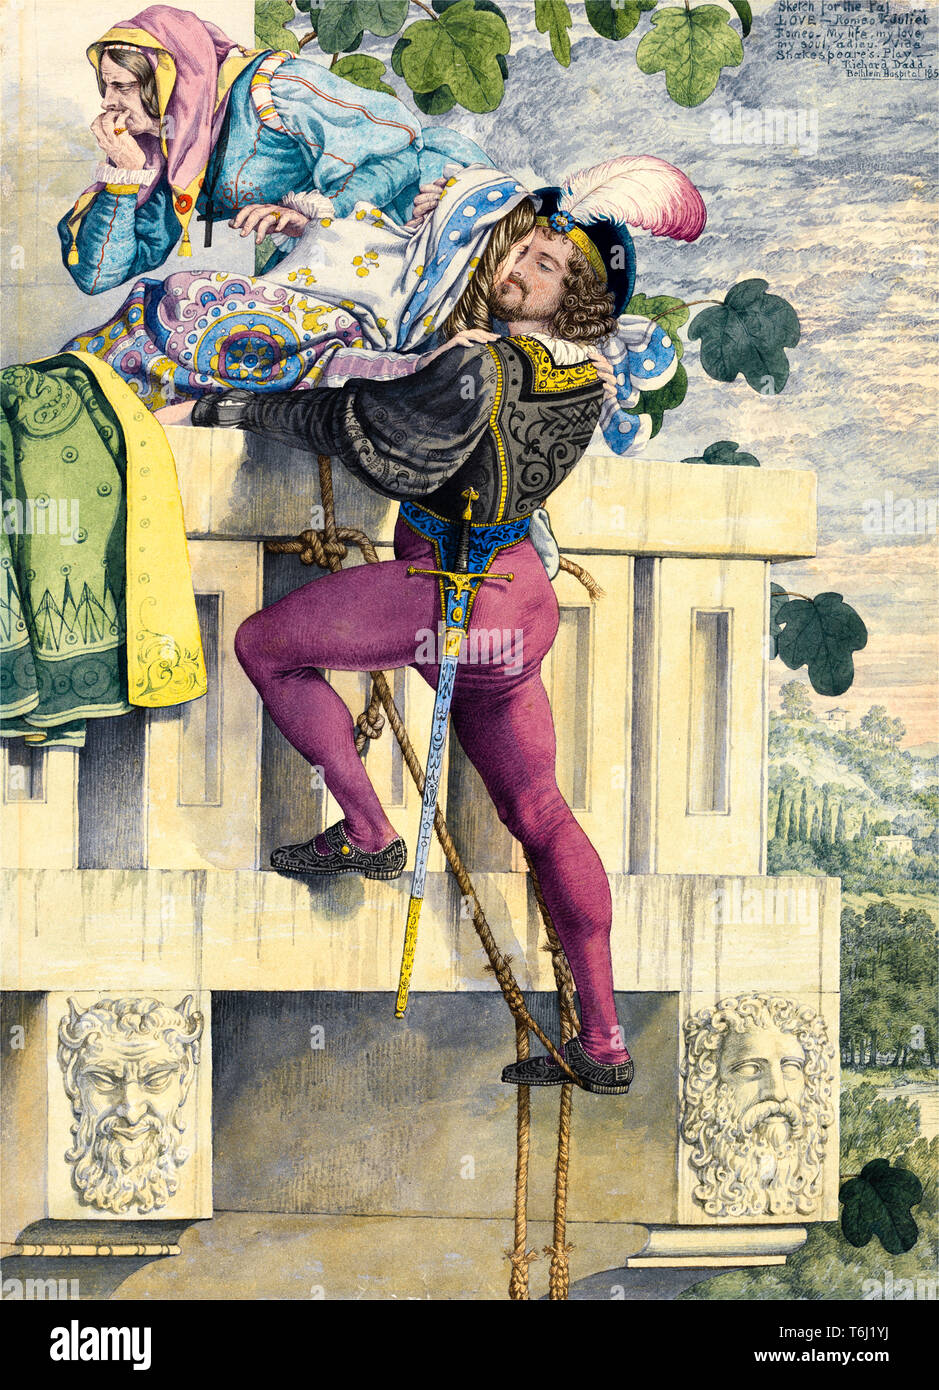 Capulet's Orchard: 'Romeo and Juliet', Act III, Scene V, painting by Richard Dadd, 1853 Stock Photo